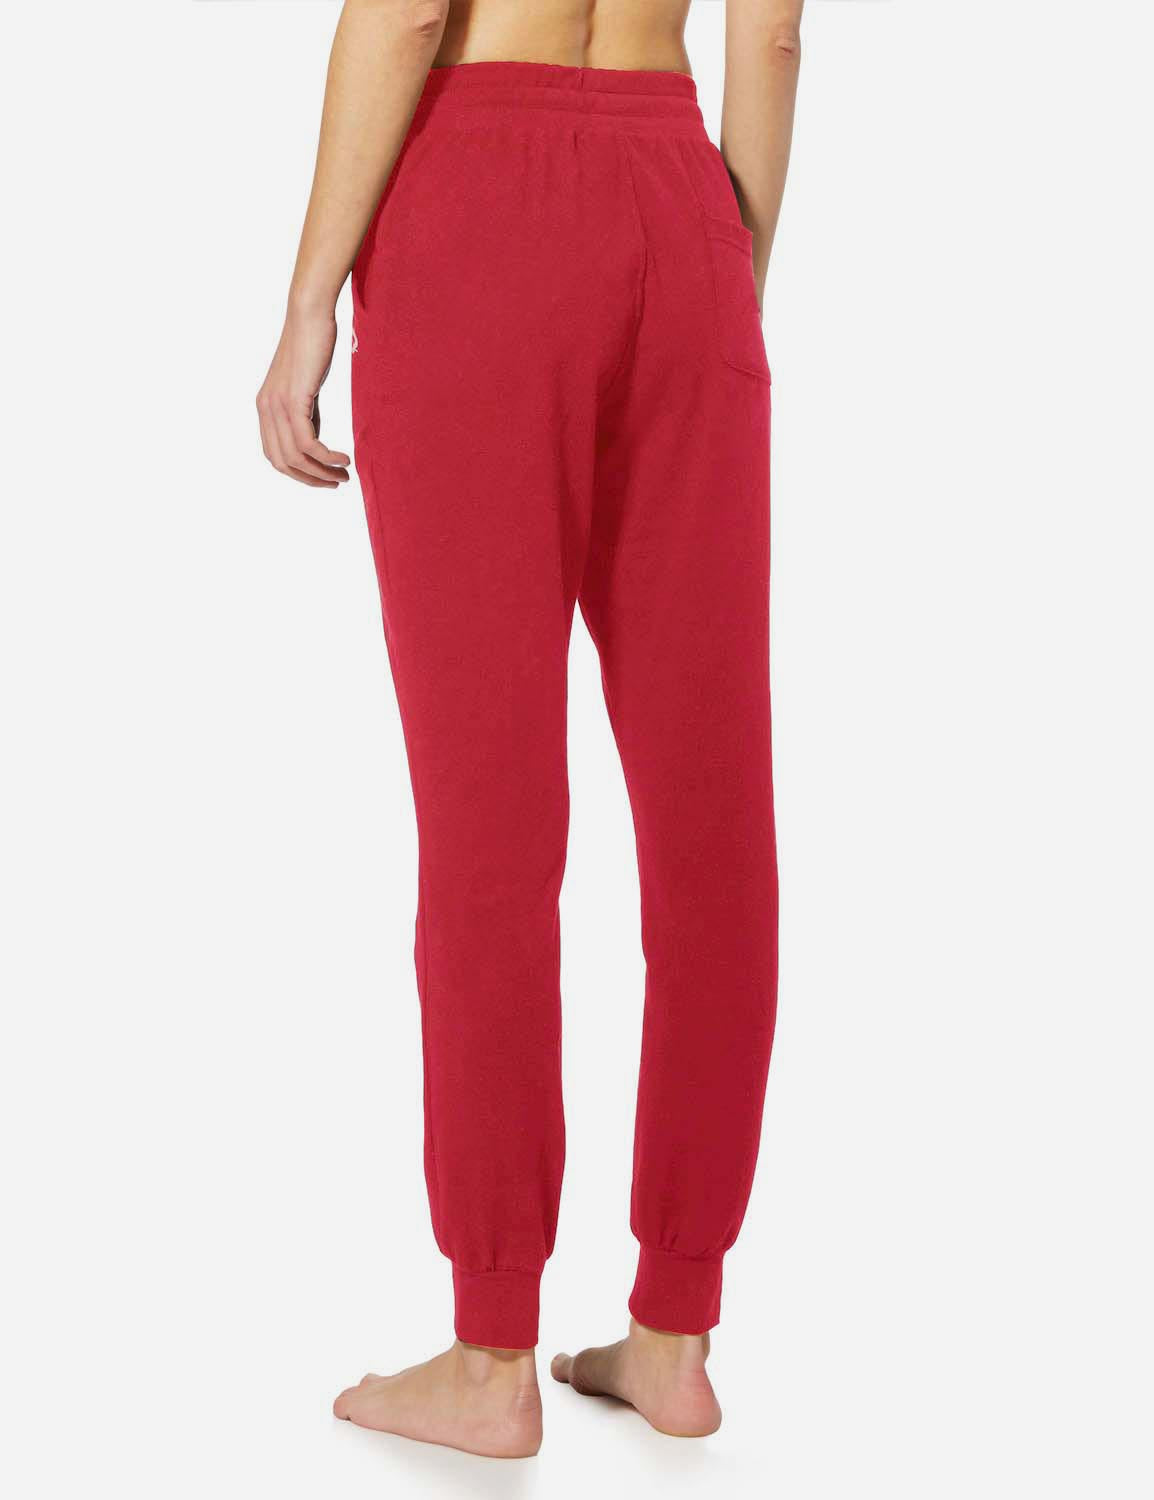 Baleaf Women's Cotton Comfy Pocketed & Tapered Weekend Joggers abh103 Rose Red Back